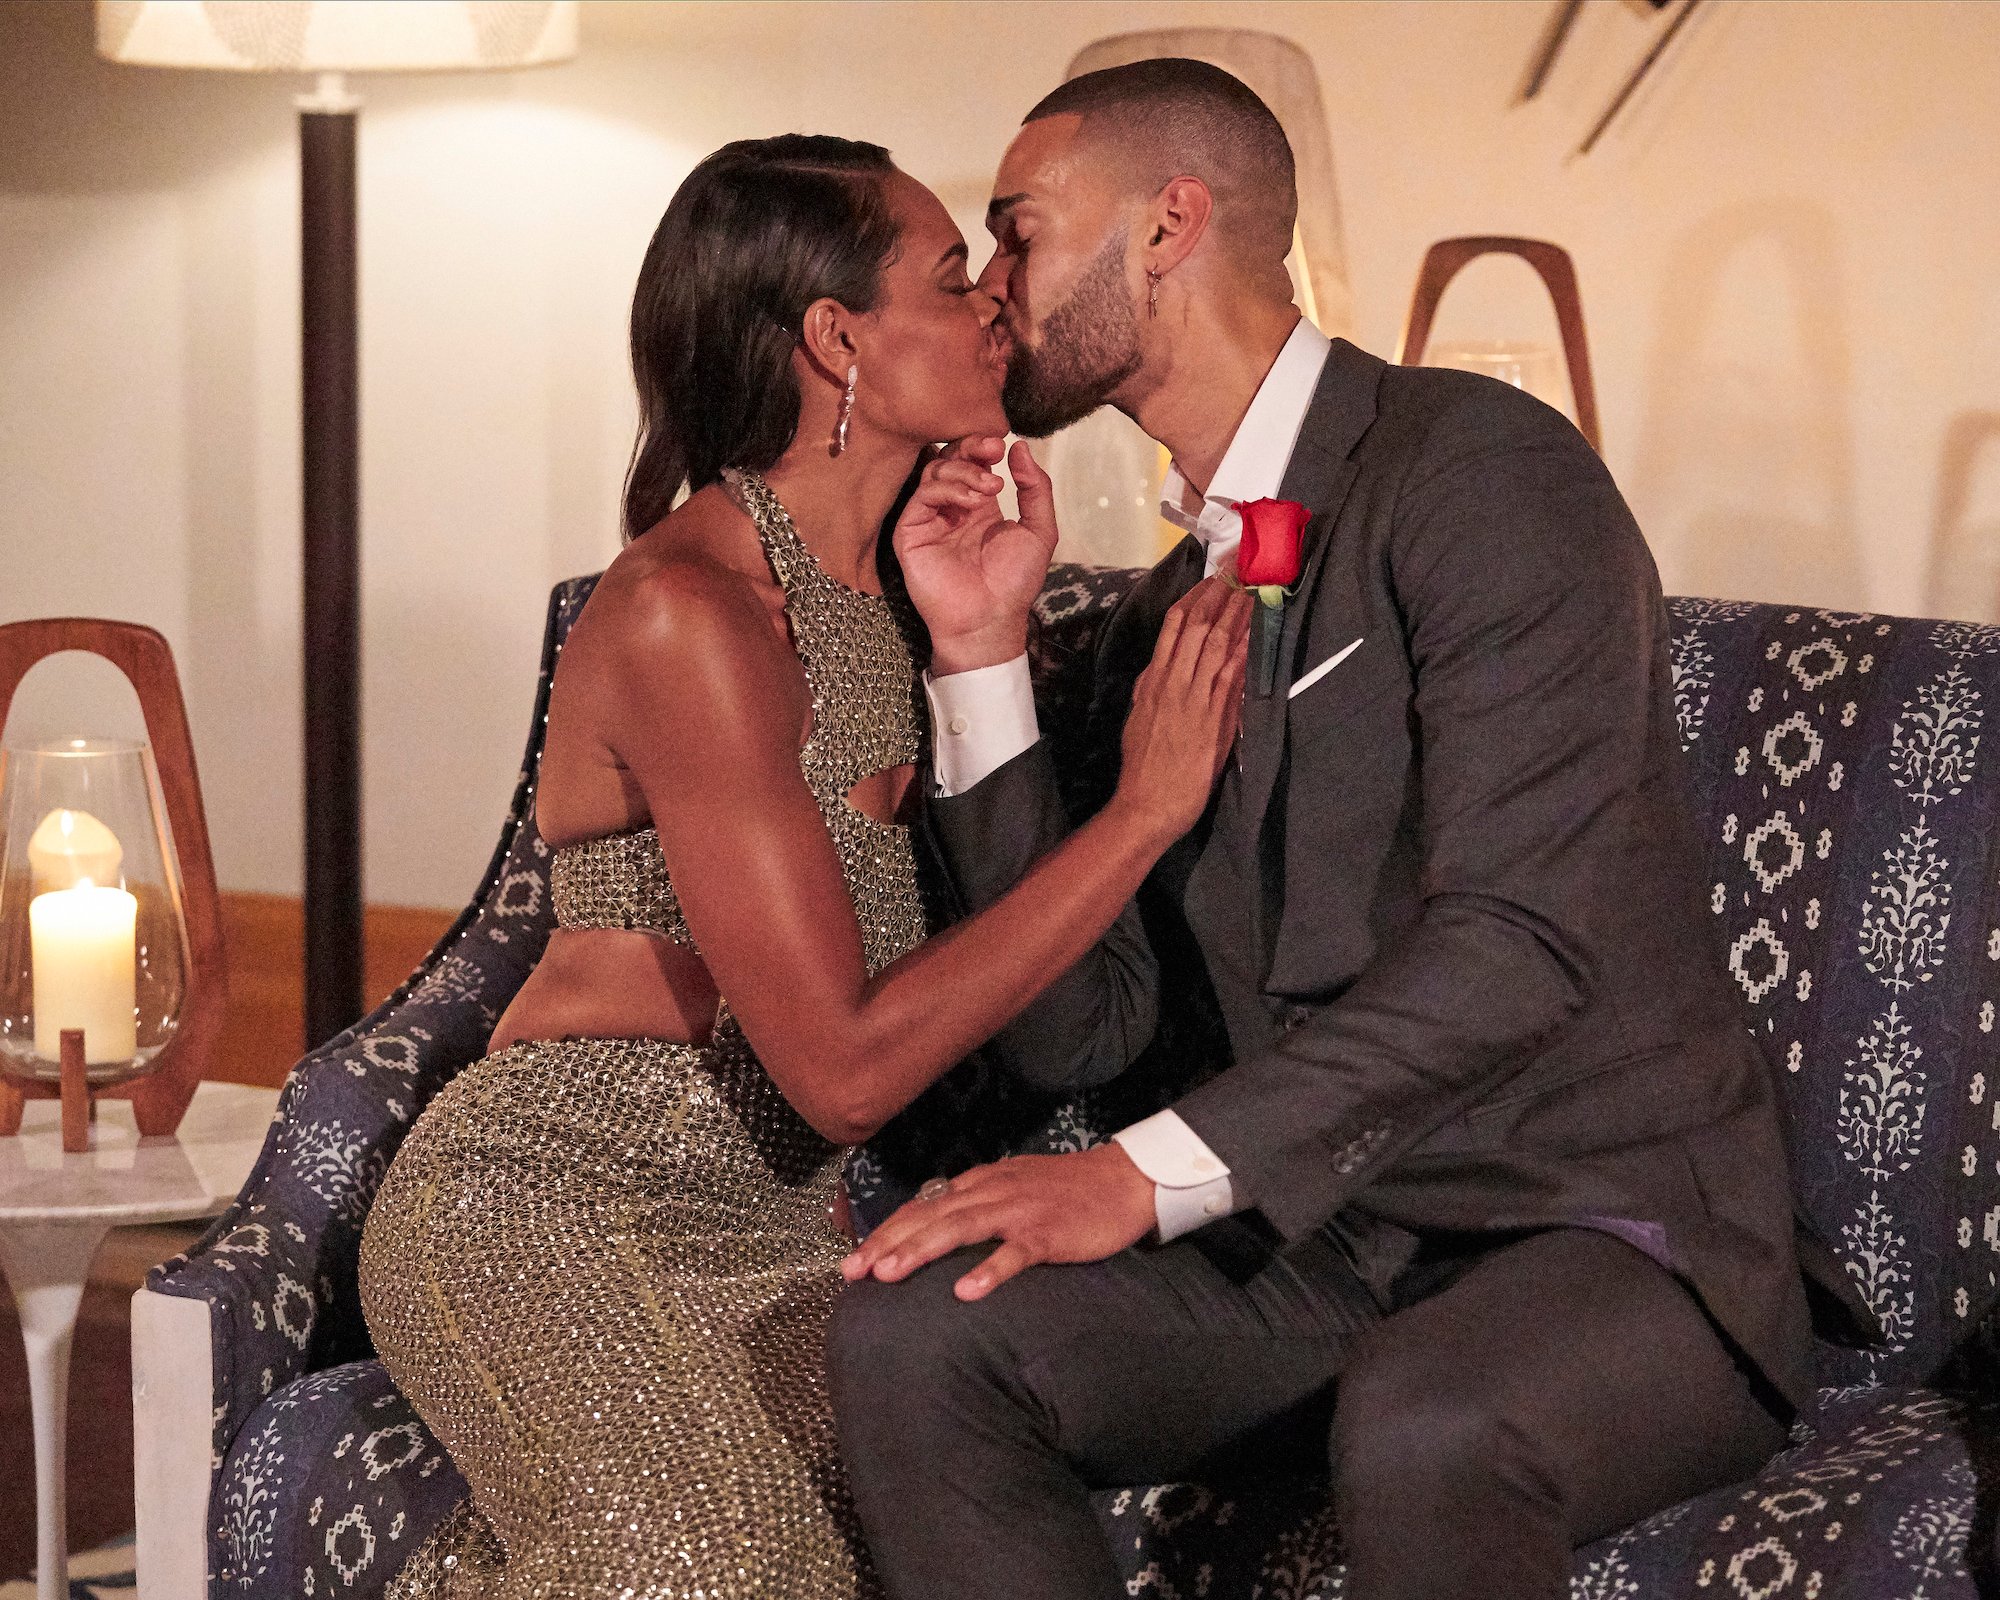 Michelle Young in a gold dress kissing Nayte Olukoya in a suit while sitting on a couch in a production still from 'The Bachelorette' Season 18. Nayte received the First Impression Rose on the first night.